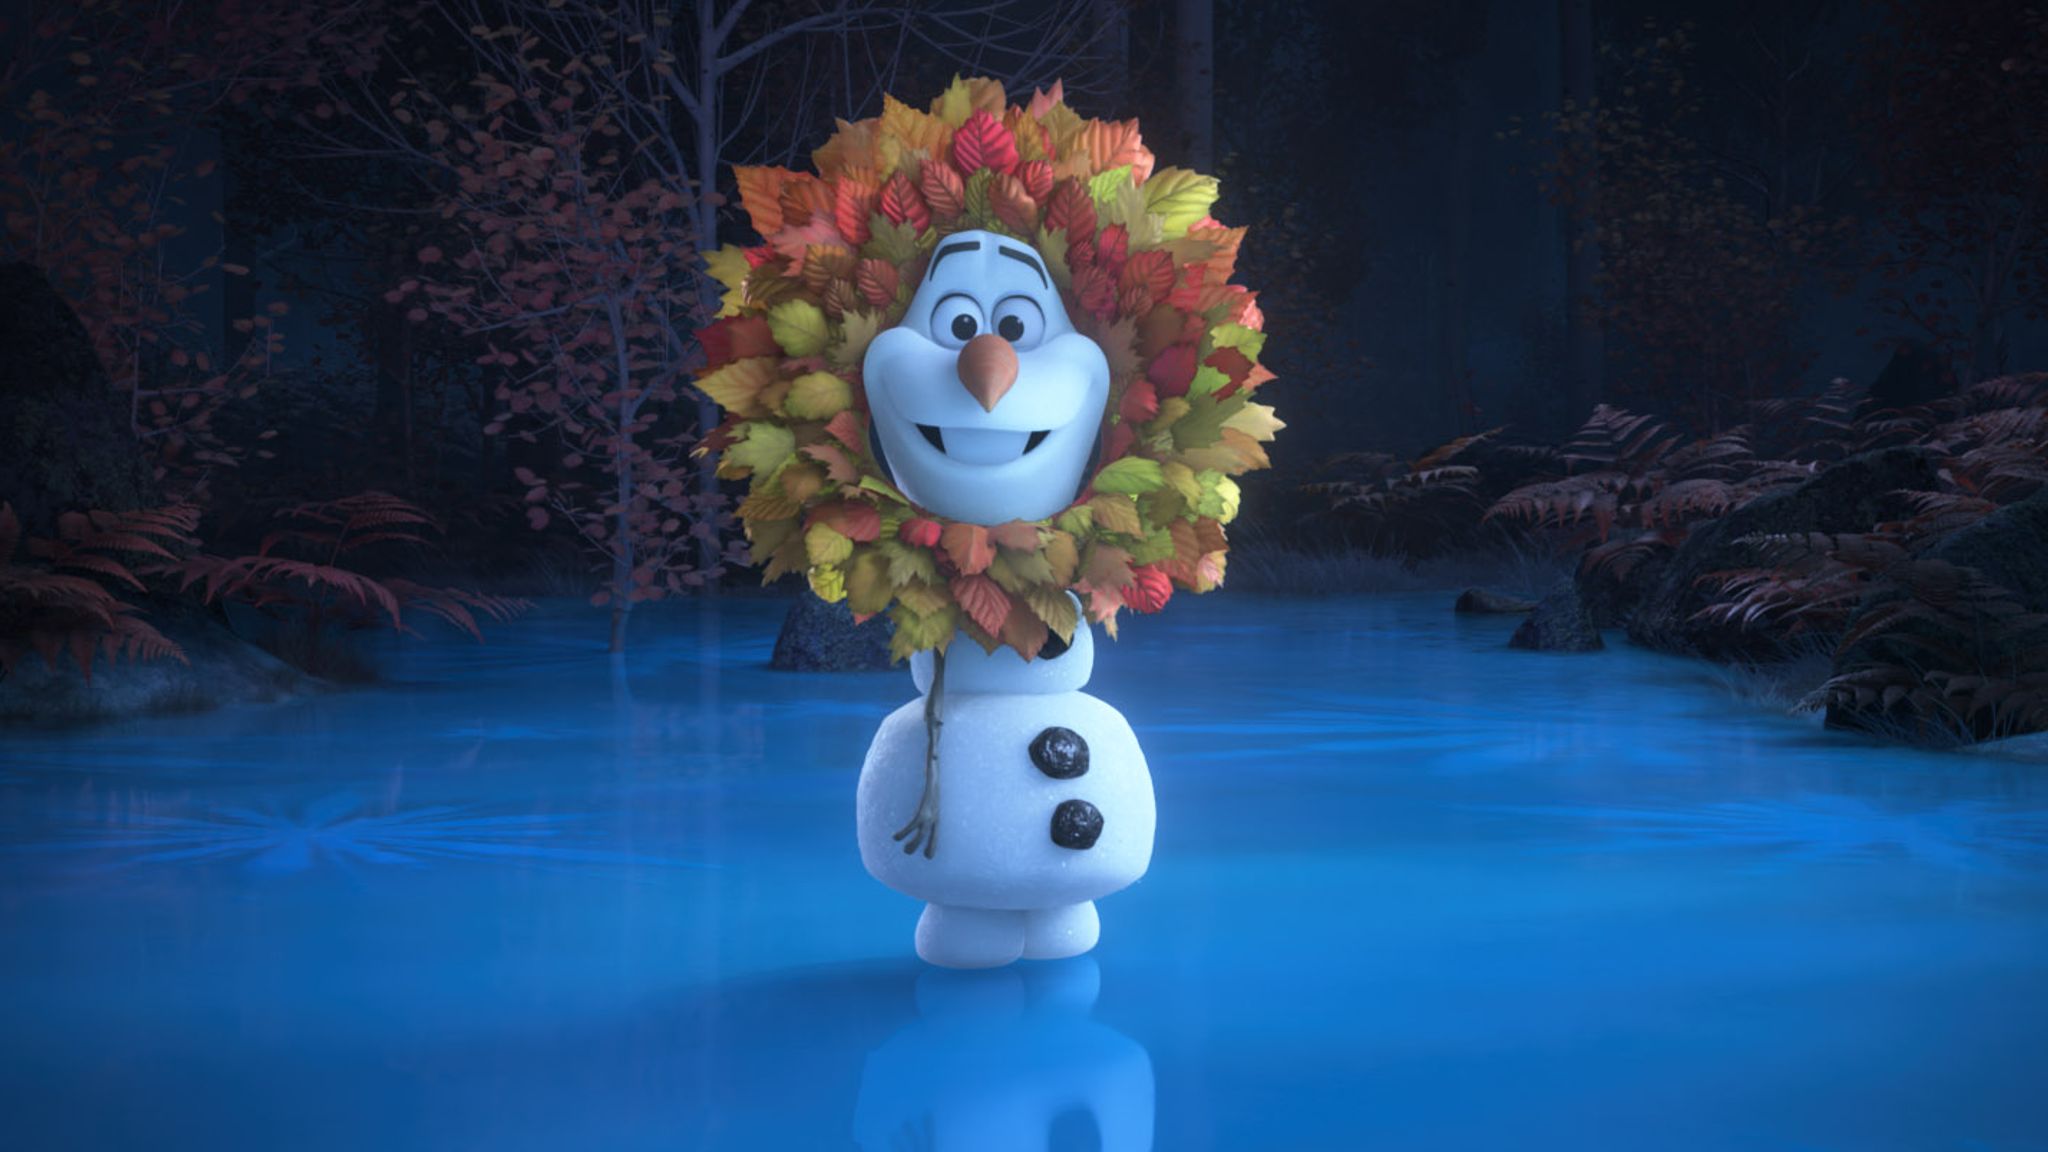 Disney Animators Reflect On The Popularity Of Frozen S Olaf As He Gets A New Series Of Shorts Ents Arts News Sky News